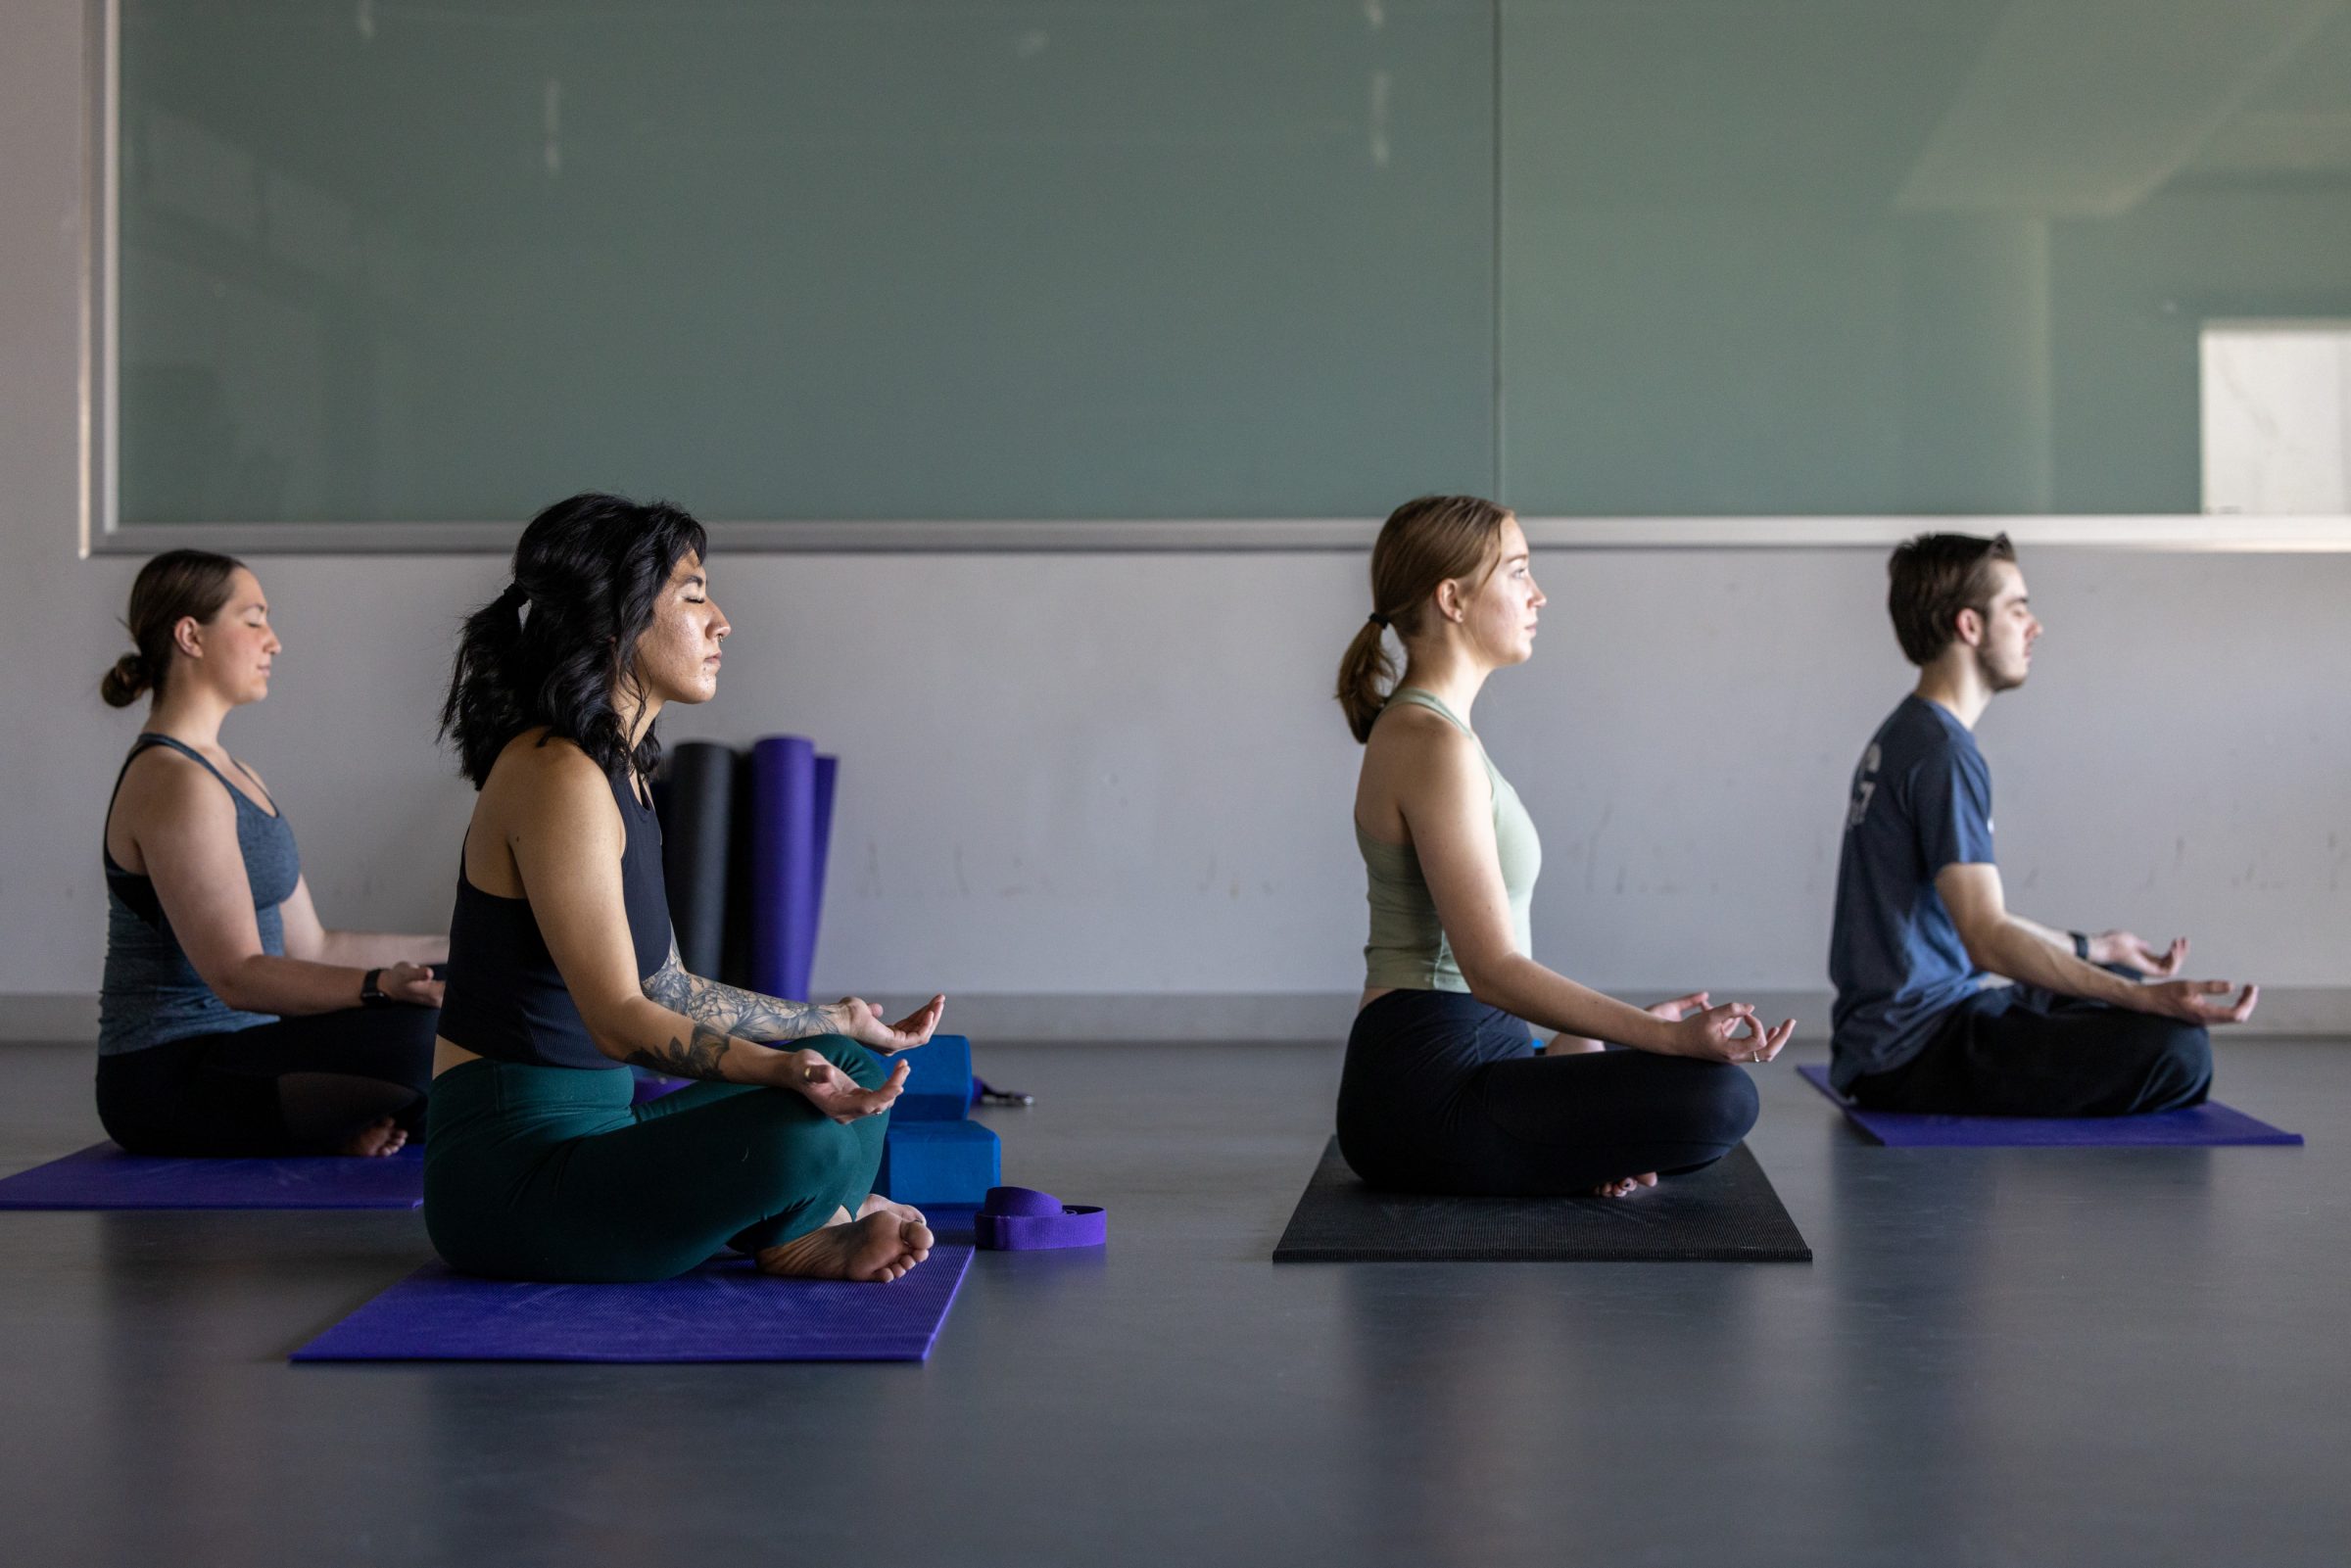 Students sit in a yoga pose.